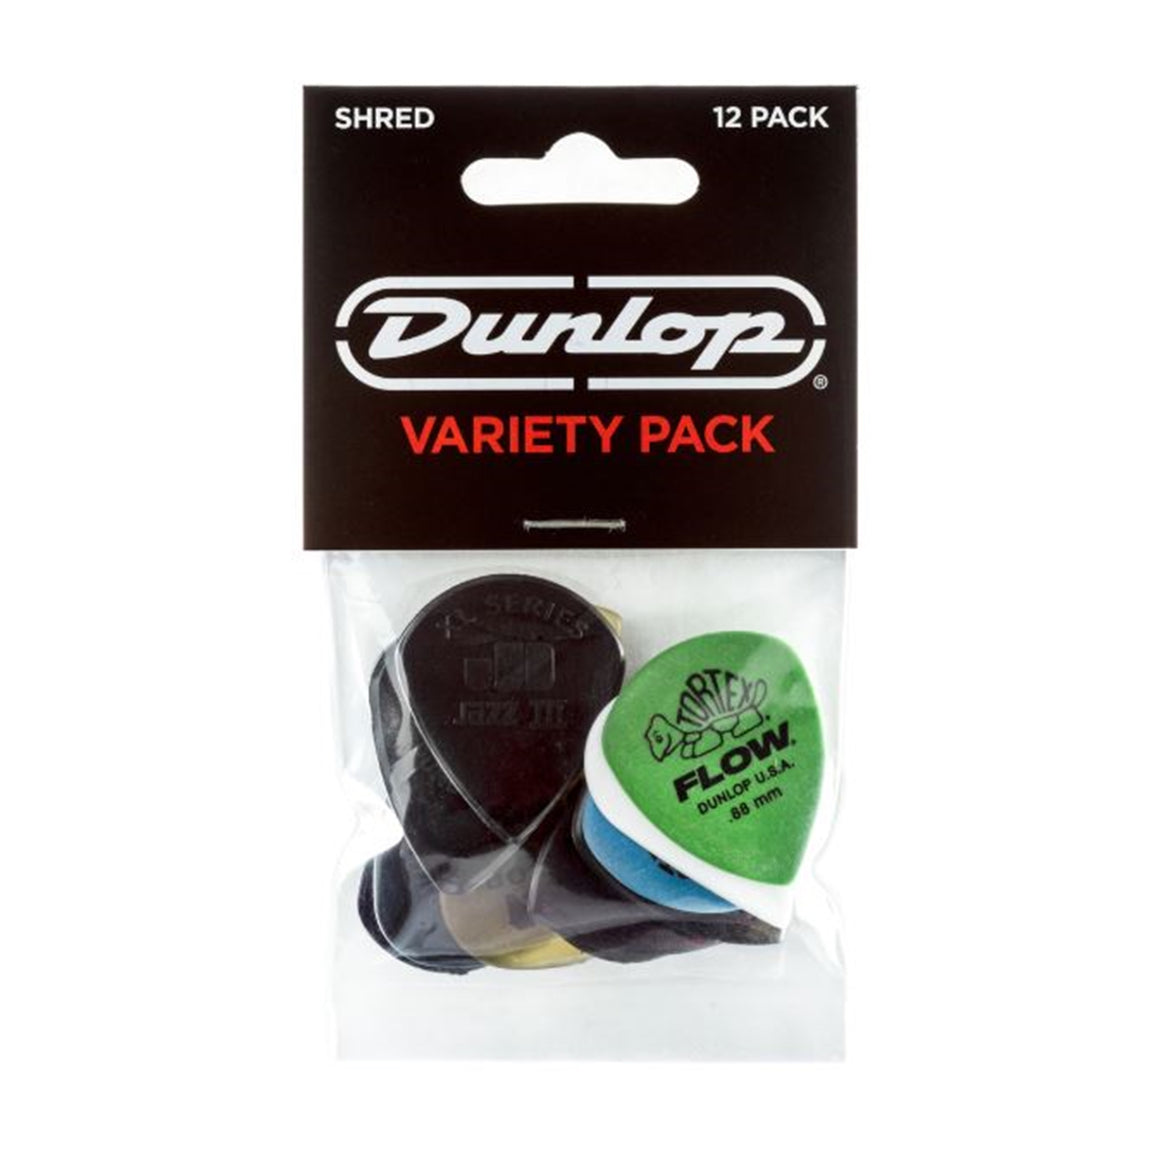 DUNLOP PVP118 Shred Guitar Variety Pack